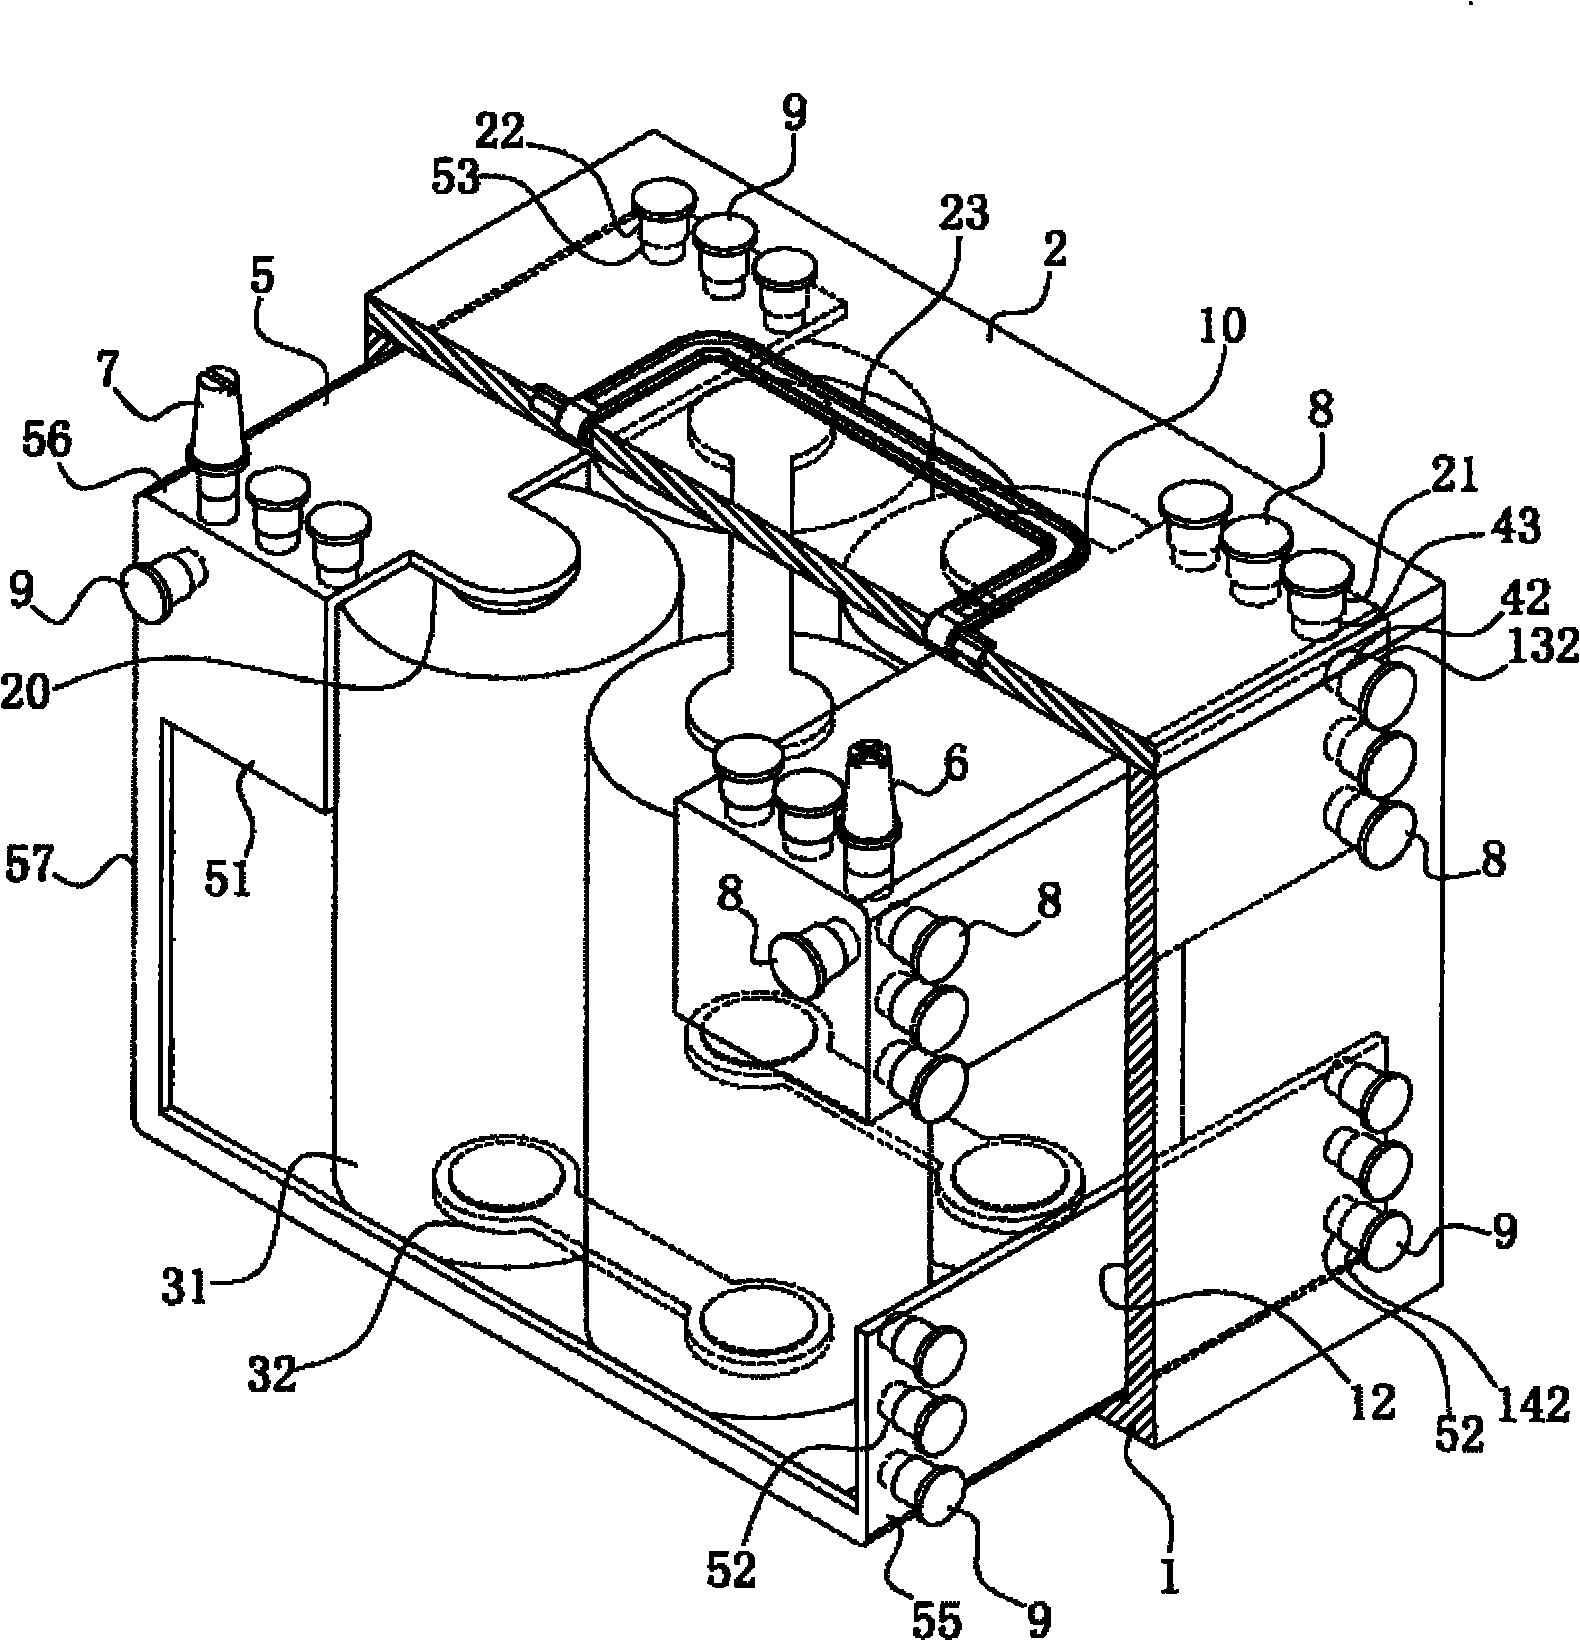 Battery device for general purpose automobile